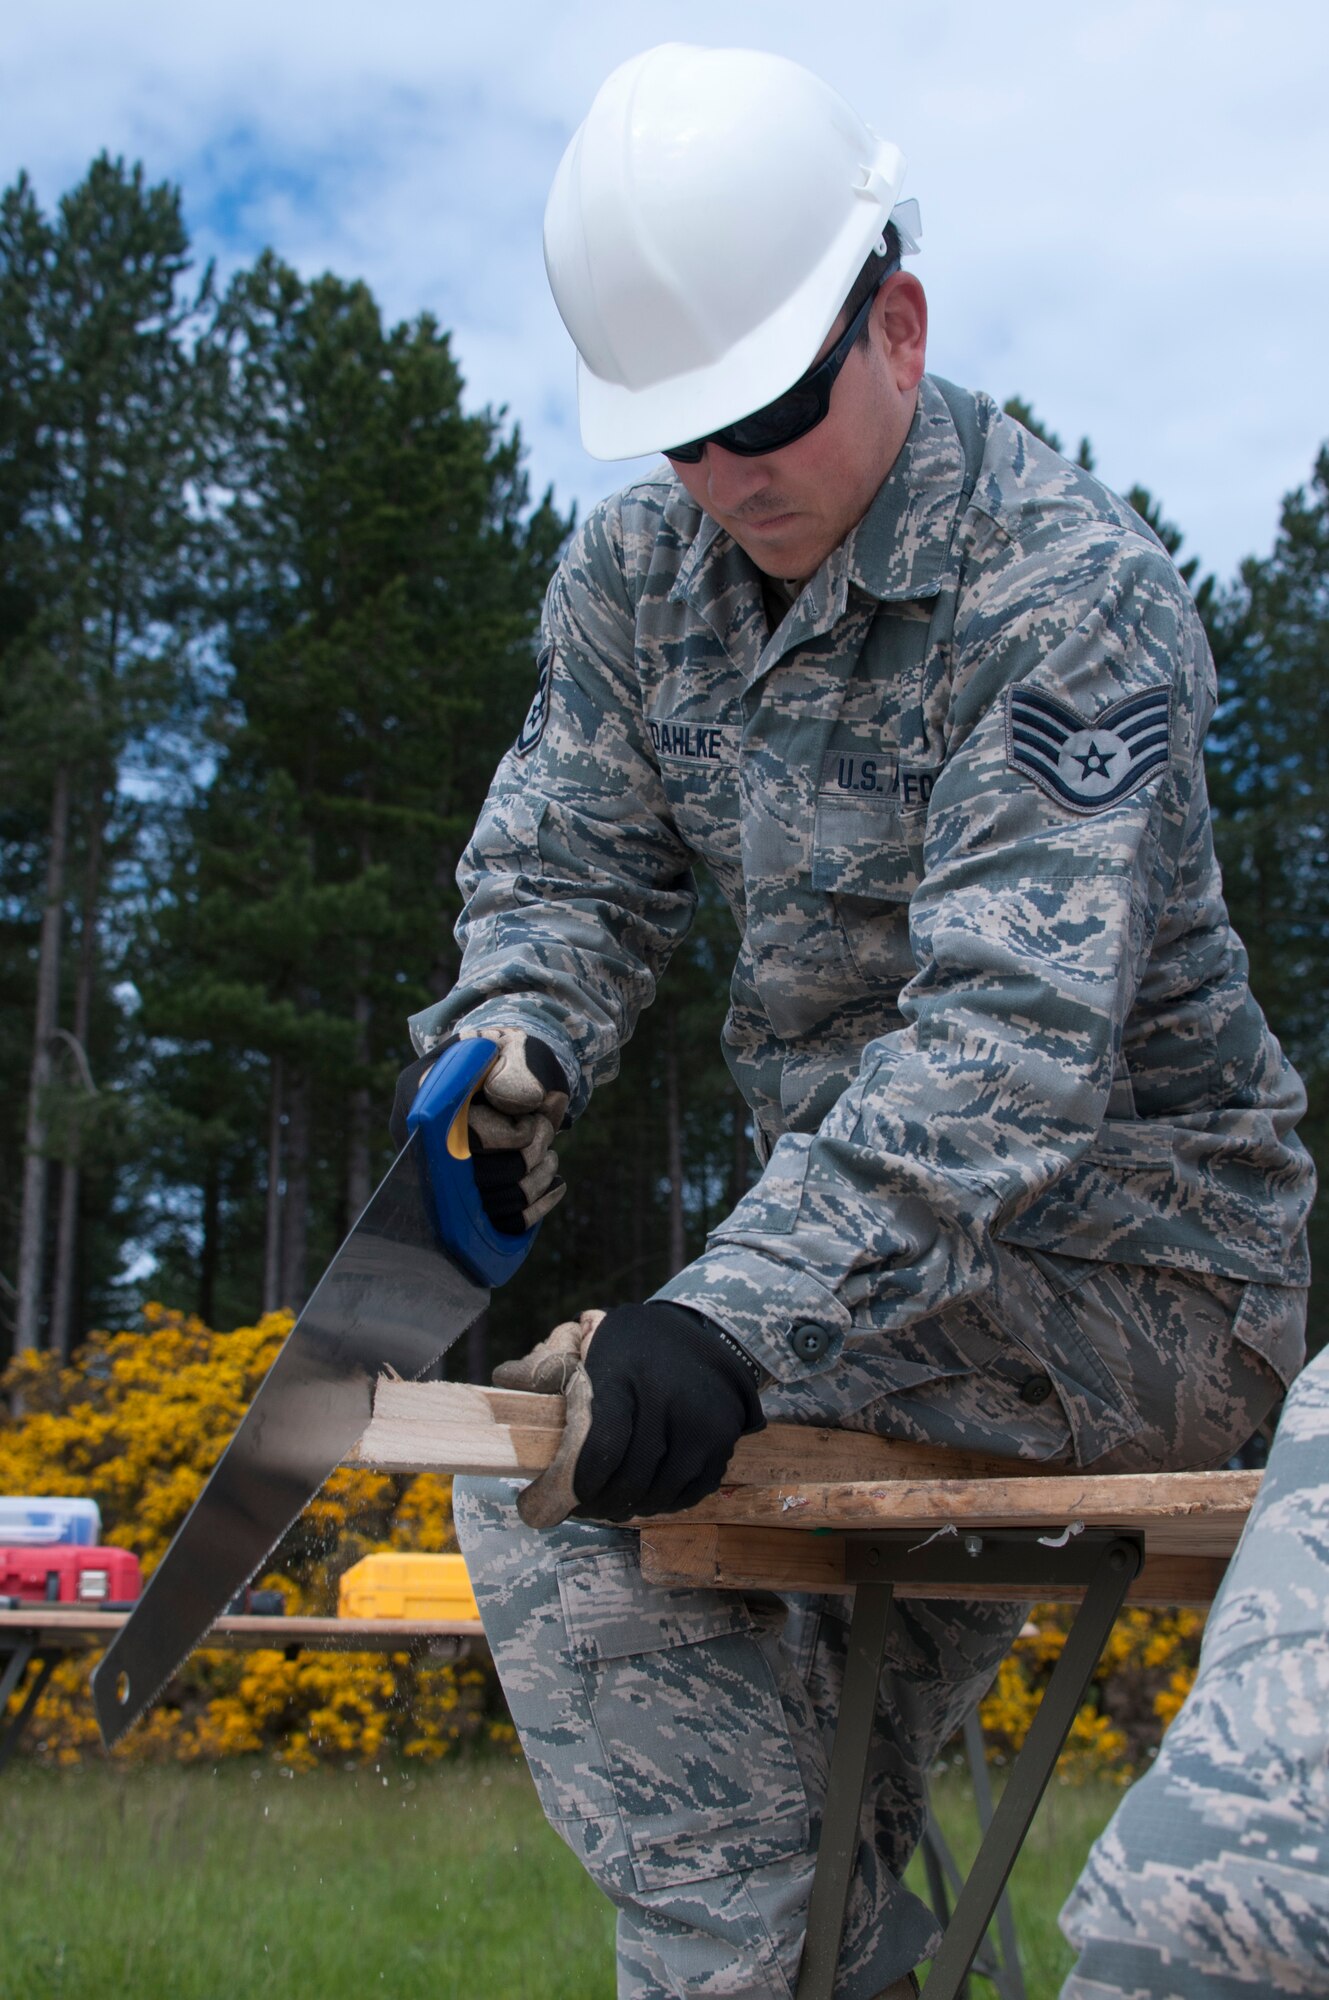 U.S. Air Force Staff Sgt. Daniel Dahlke, a structural specialist Civil Engineering Squadron of the 128th Air Refueling Wing, uses a handsaw to cut a section of wood to the correct size June 10, 2015, at Kinloss Barracks in Morayshire, Scotland, United Kingdom, in support of Exercise Flying Rose. Exercise Flying Rose is an exchange exercise between the U.S. Air National Guard and British Army, where forces deploy to one another’s countries and work to complete construction-related tasks. (U.S. Air National Guard photo by Airman 1st Class Morgan R. Lipinski/Released)